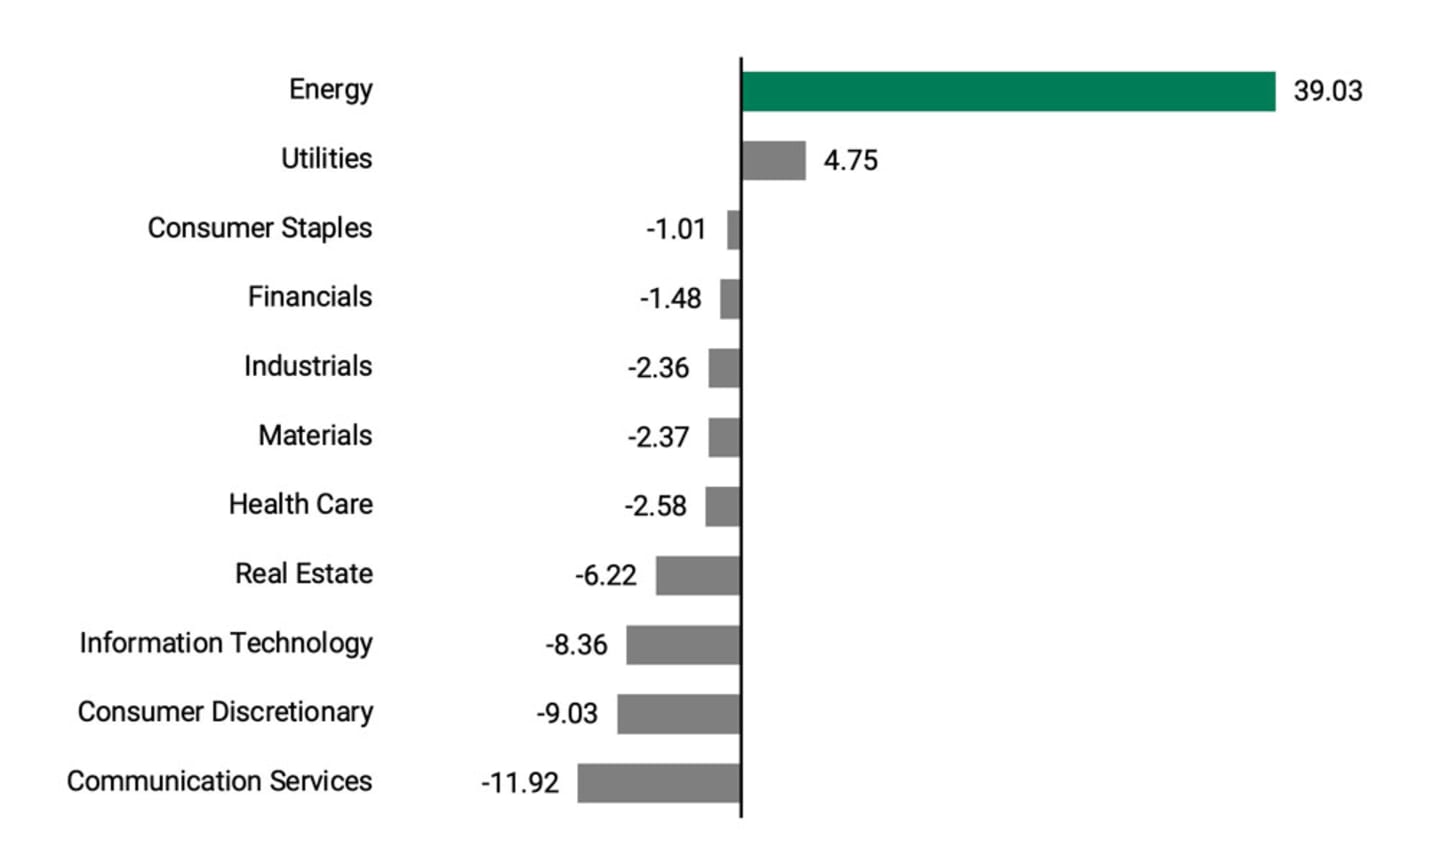 Bar chart showing the Energy sector’s total return of nearly 40% compared to negative returns for most other sectors during the three months ended March 31, 2022.